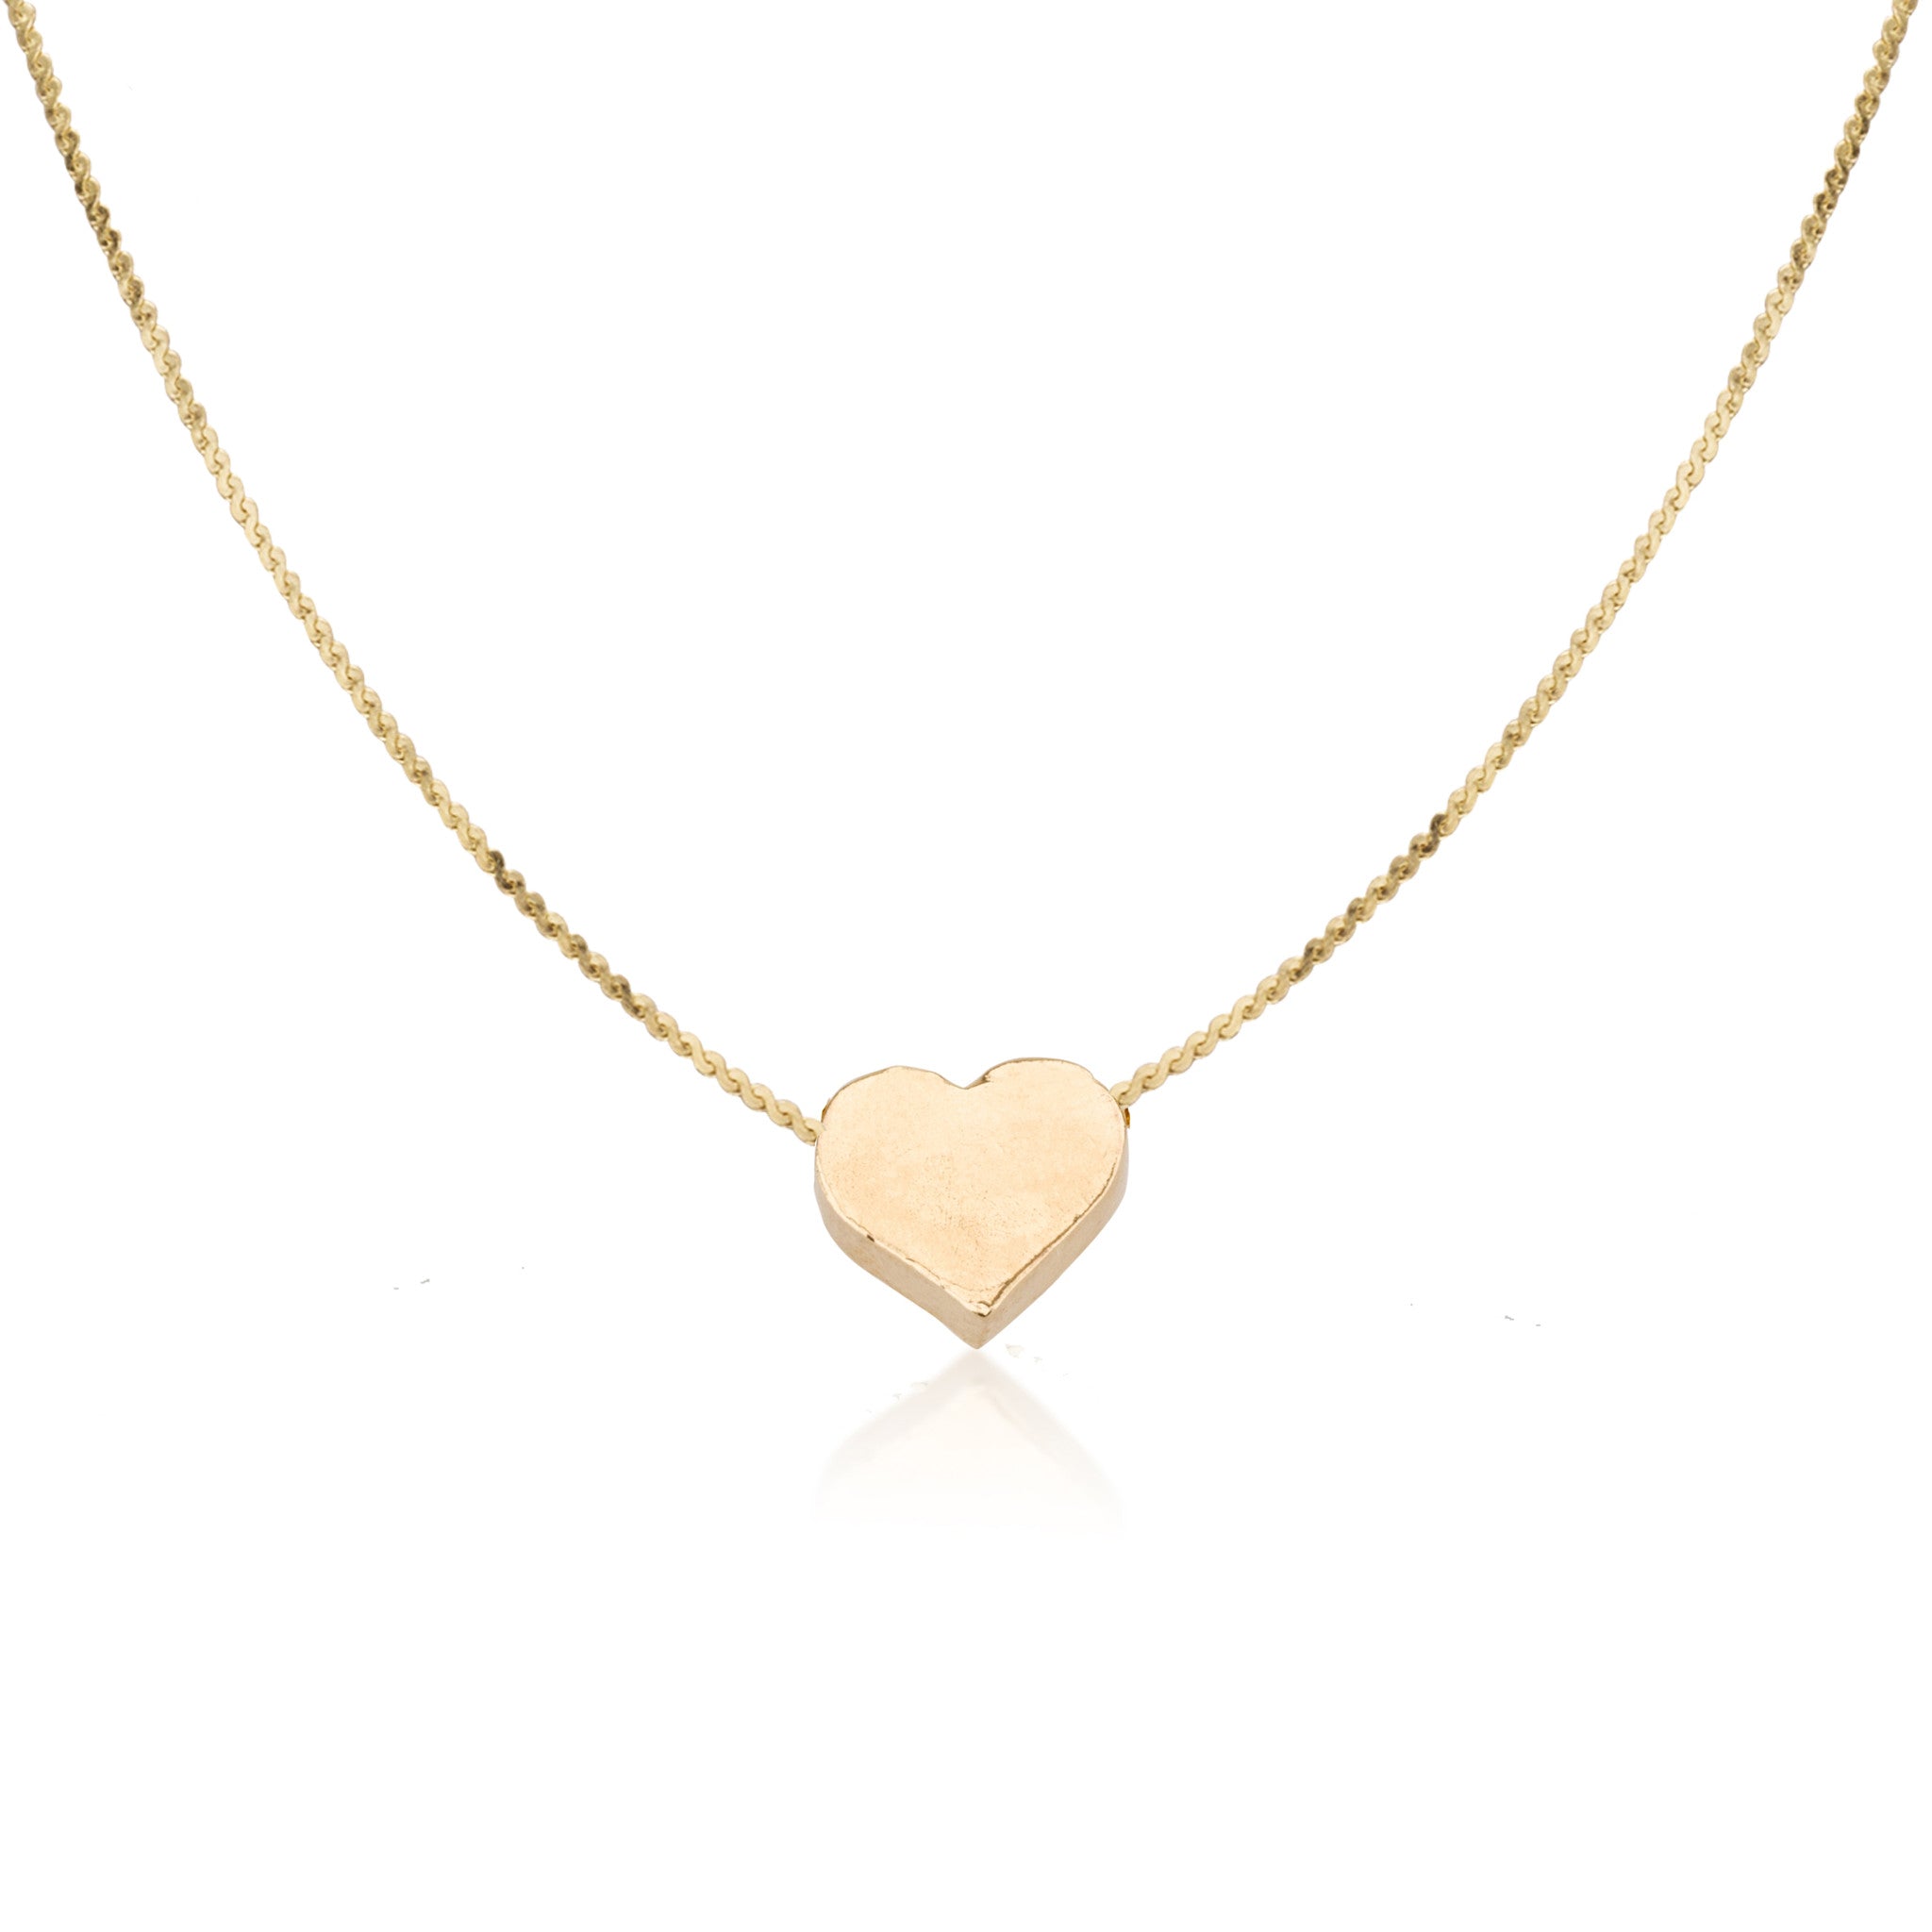 Necklaces - Small Thick Full Heart Pendant & Romi\Liya Chain Necklace